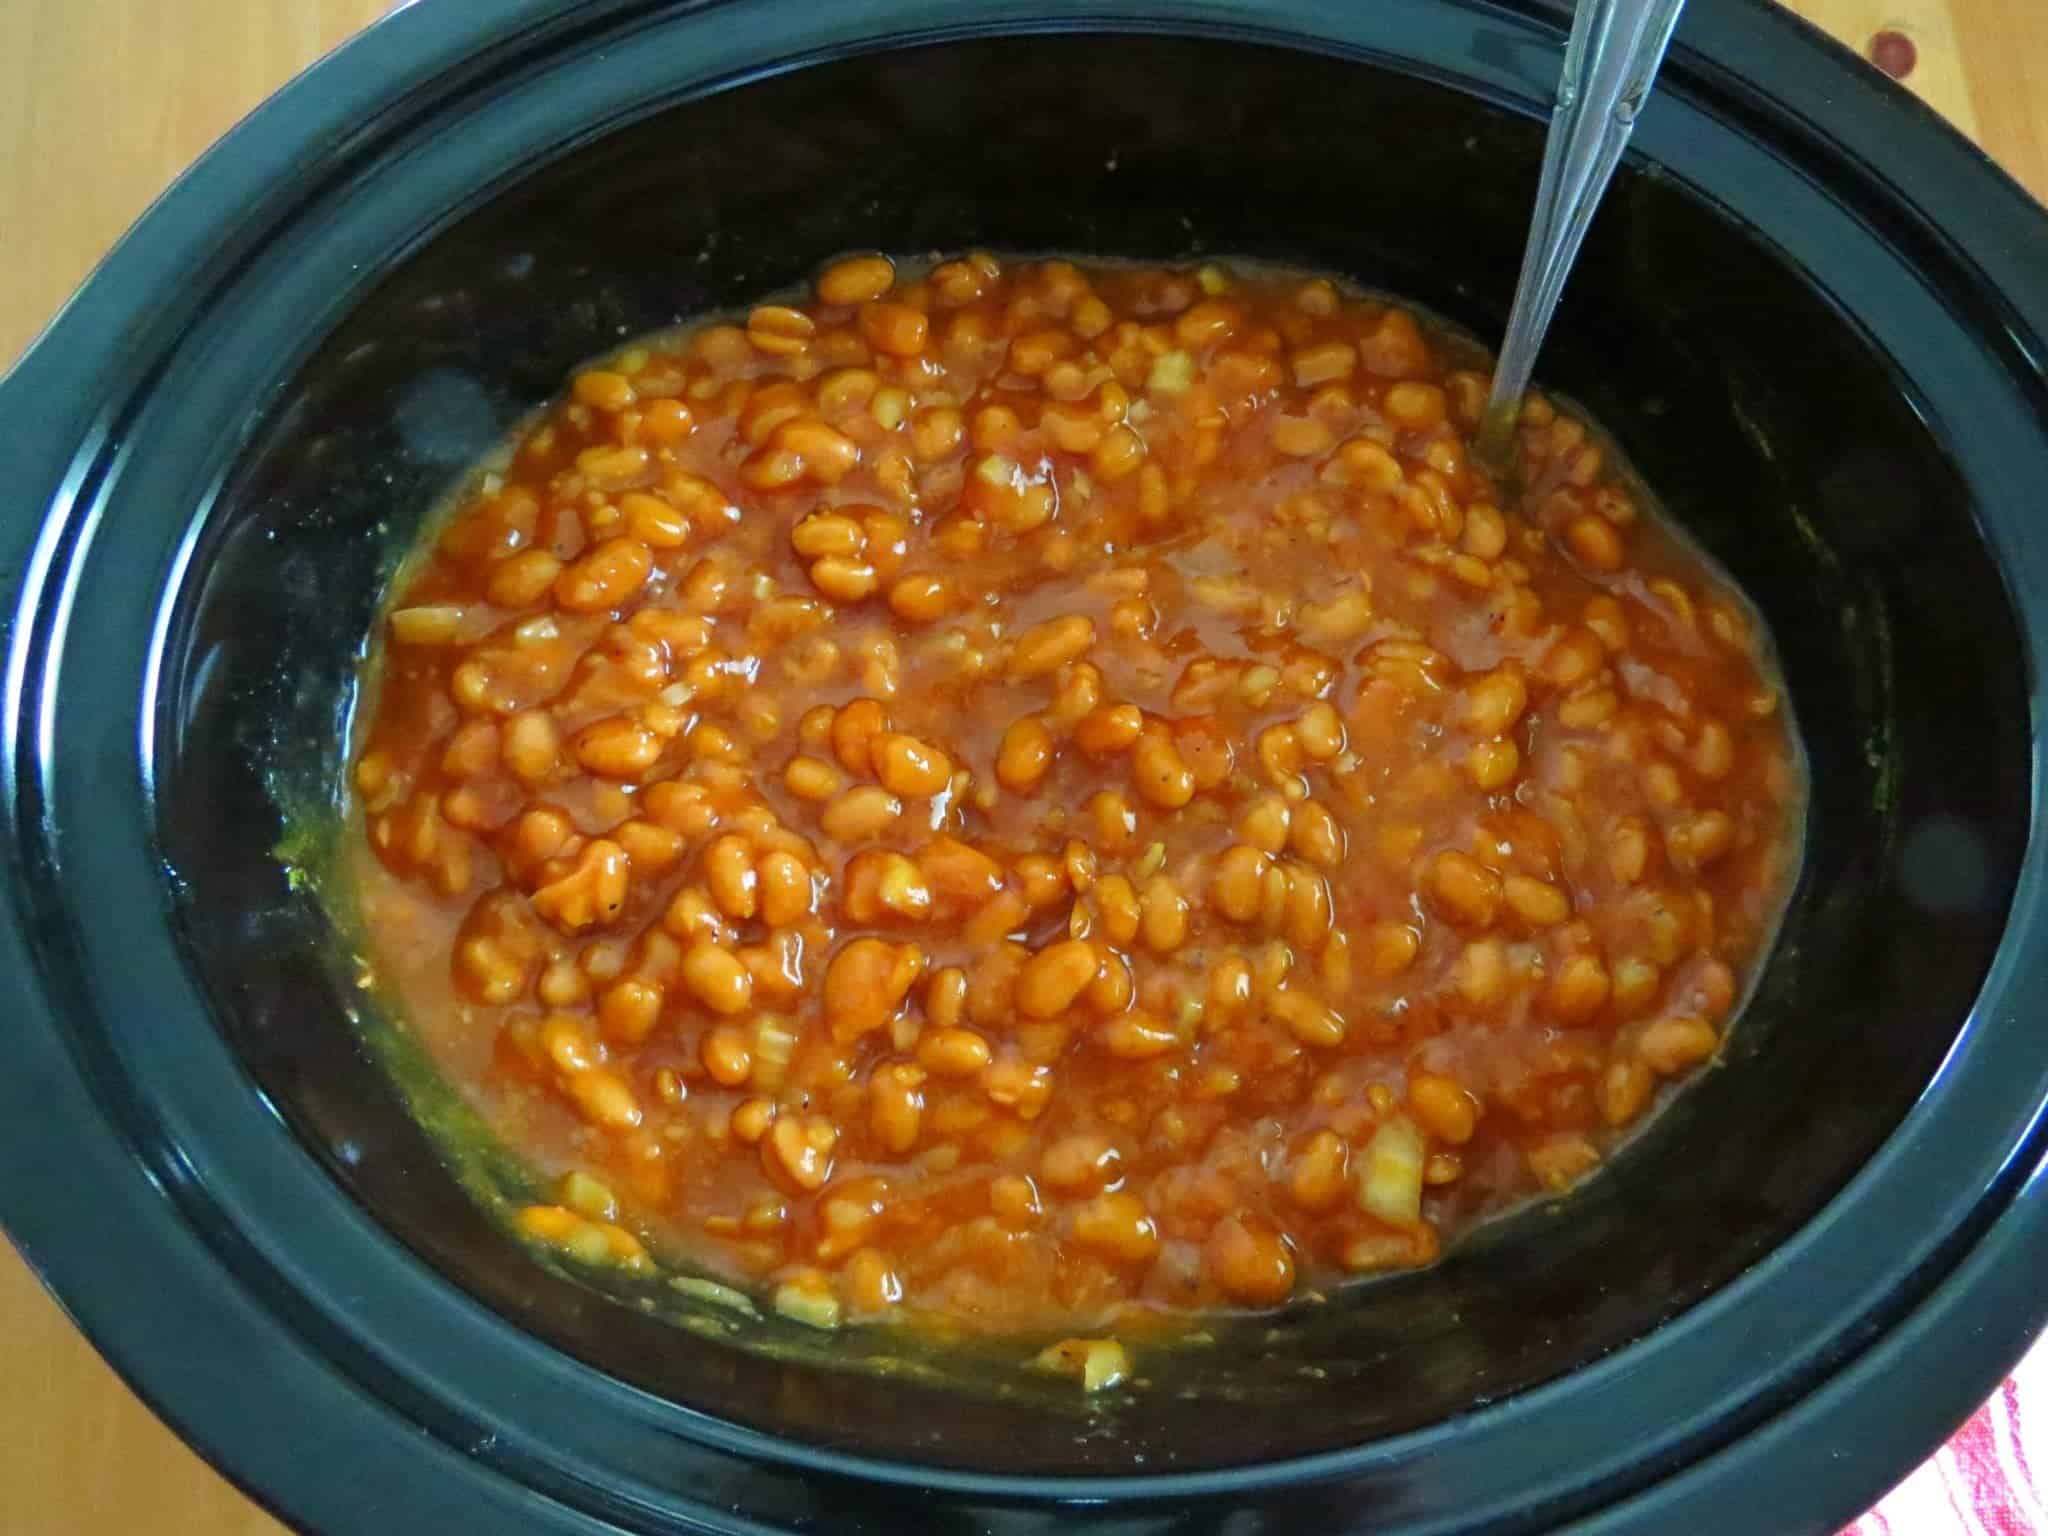 Baked Beans stirred in an oval crock pot with a spoon.